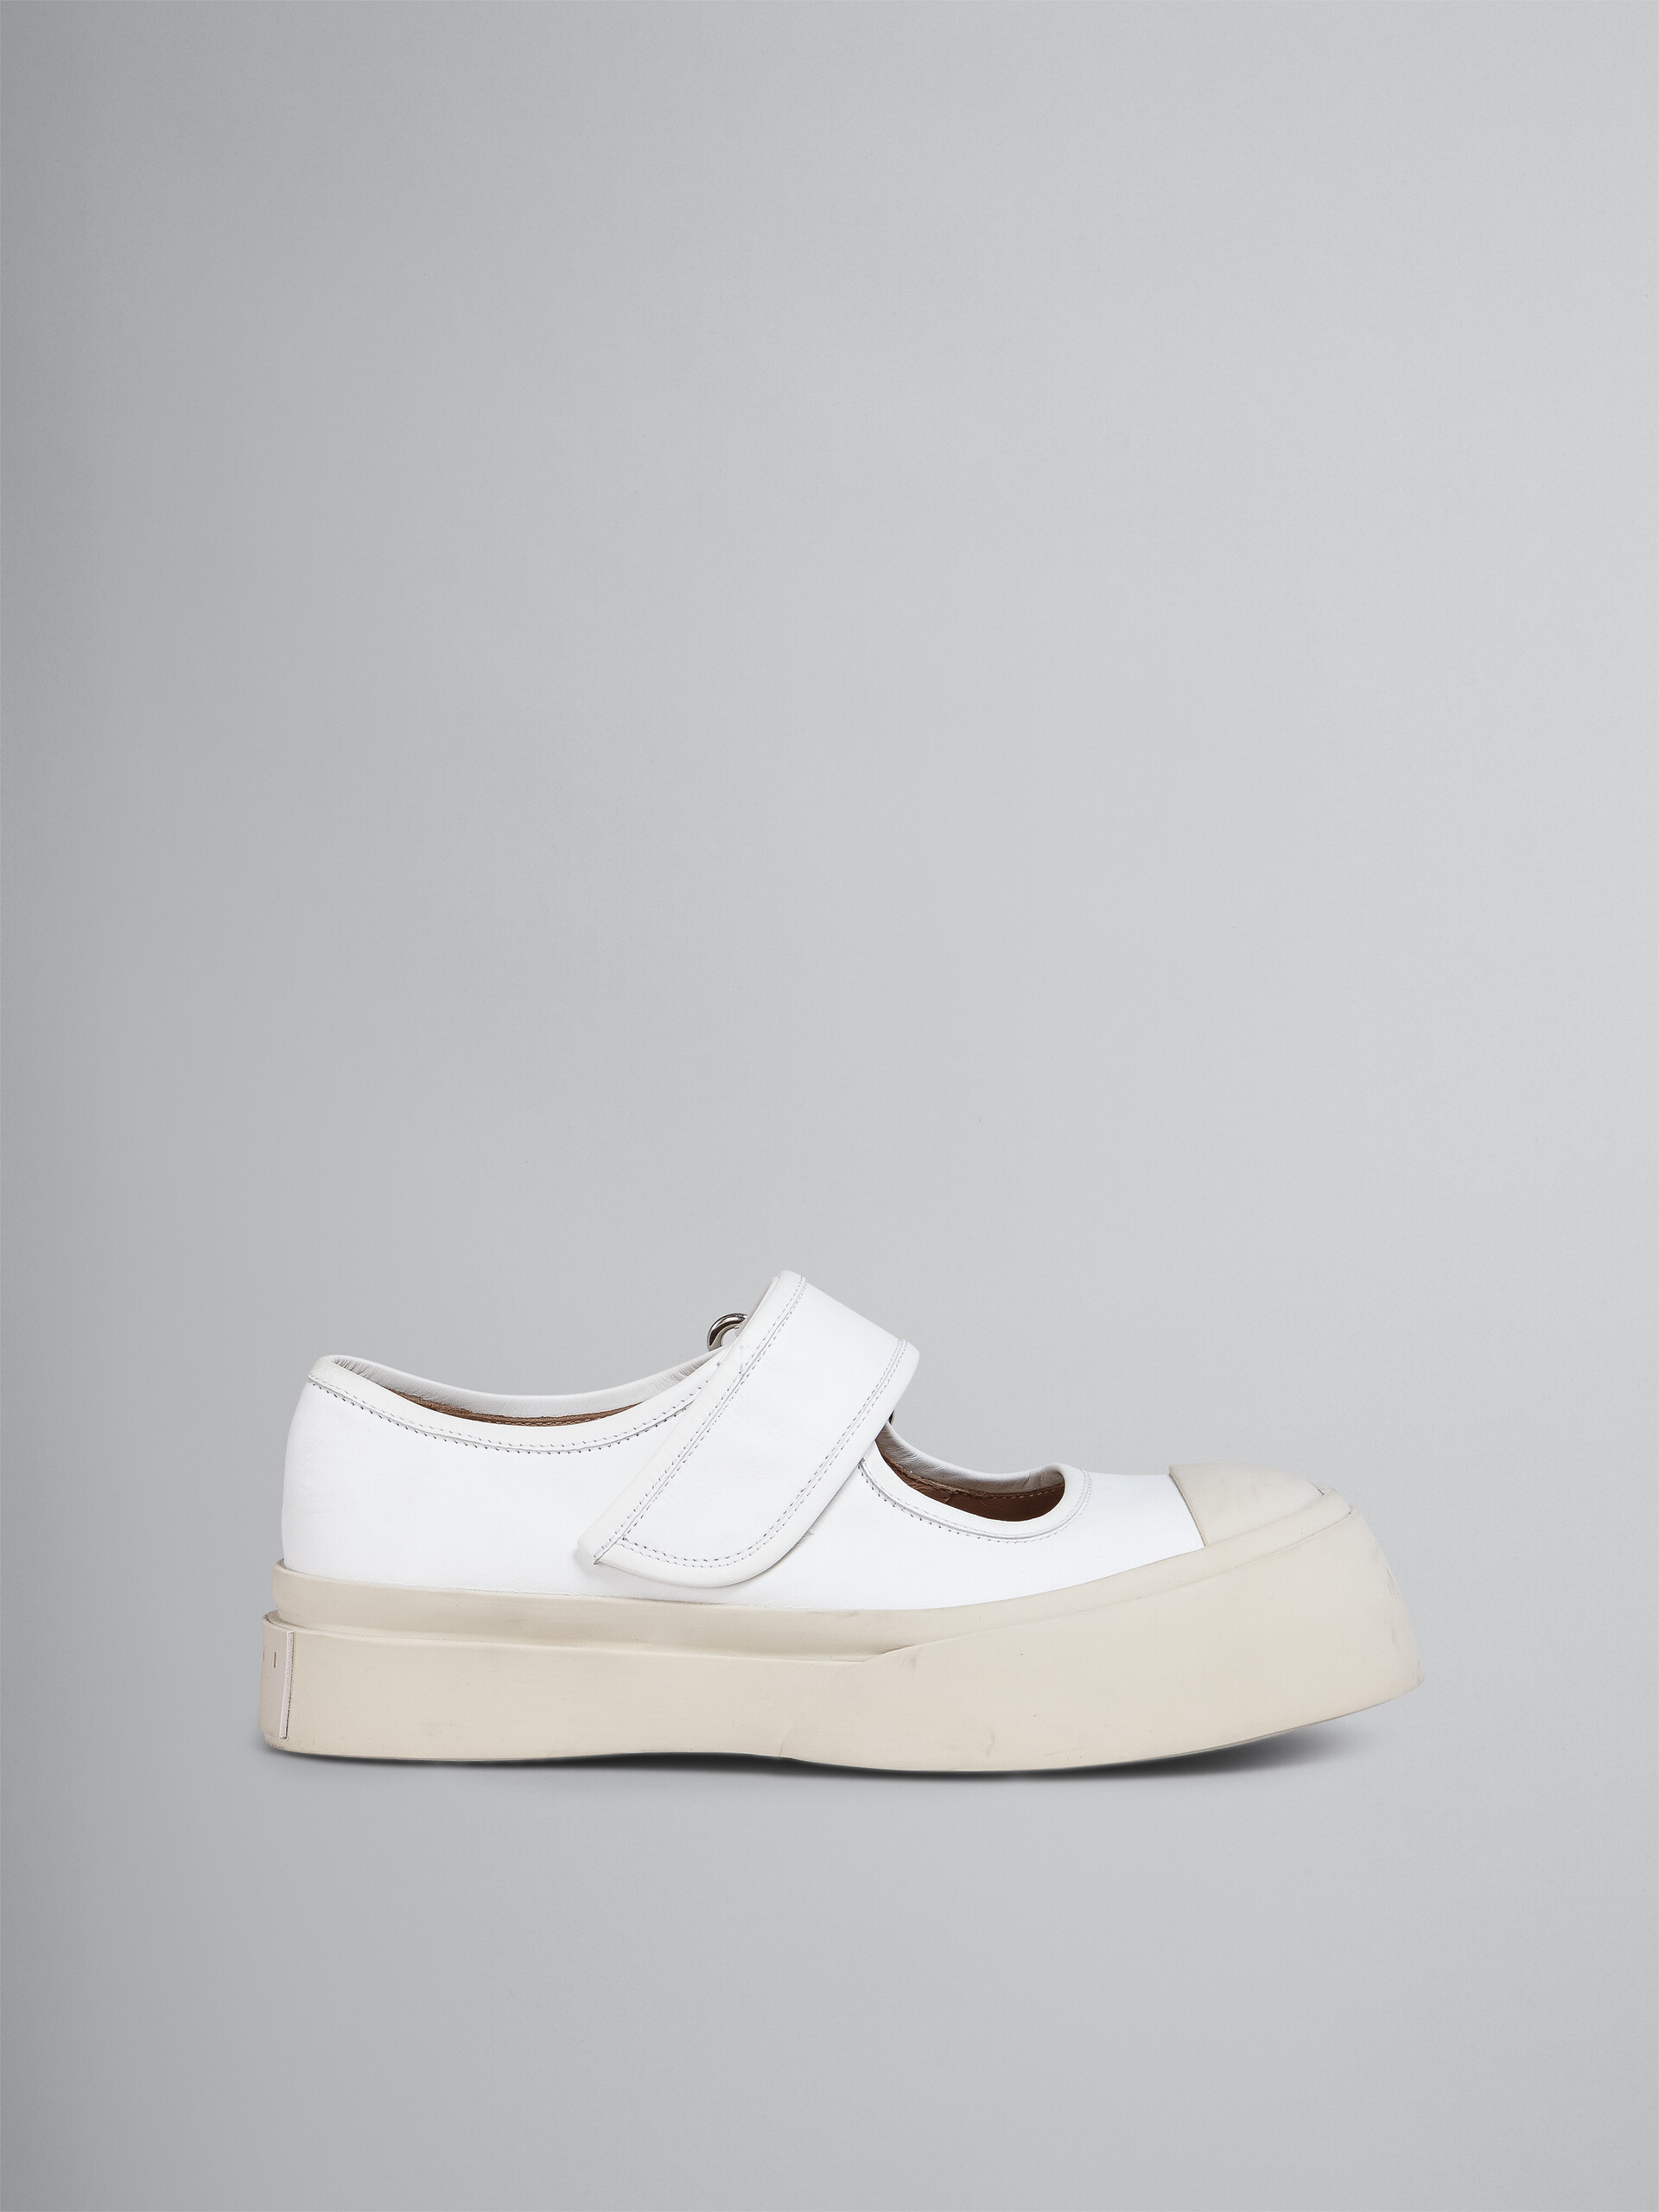 White leather Mary Jane sneaker - Sneakers - Image 1